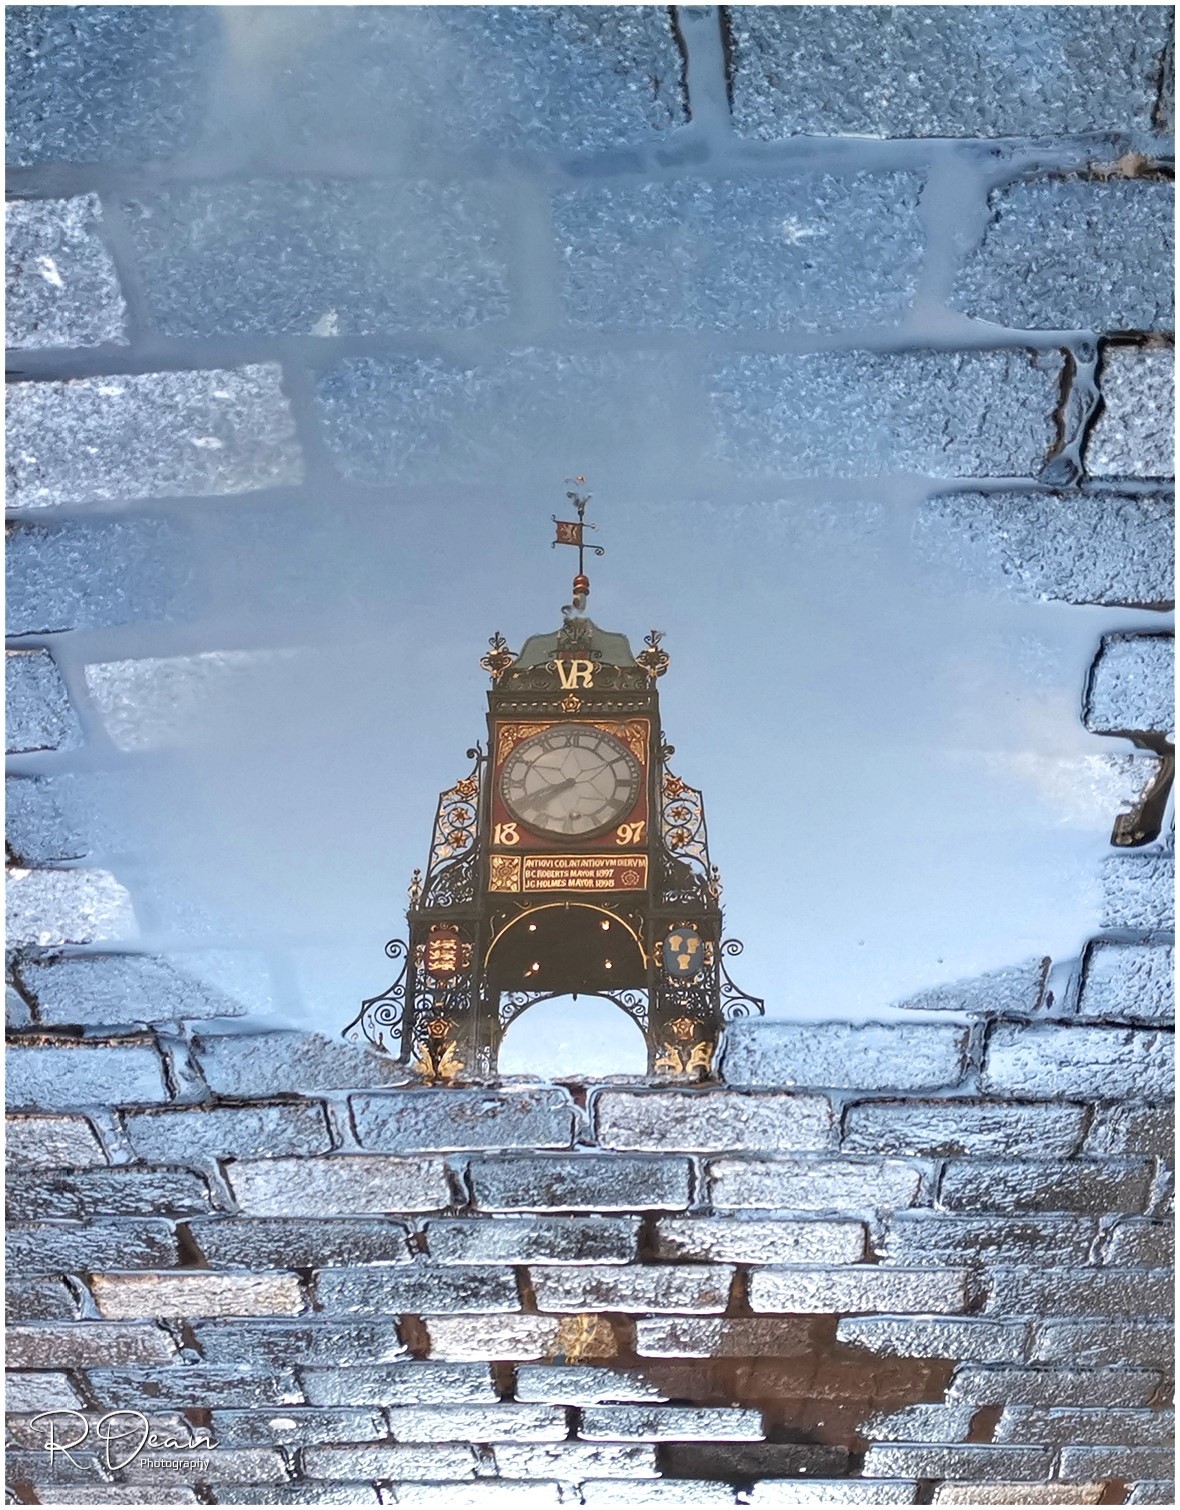 Eastgate Clock reflection on the cobbles in Chester by Russell Dean